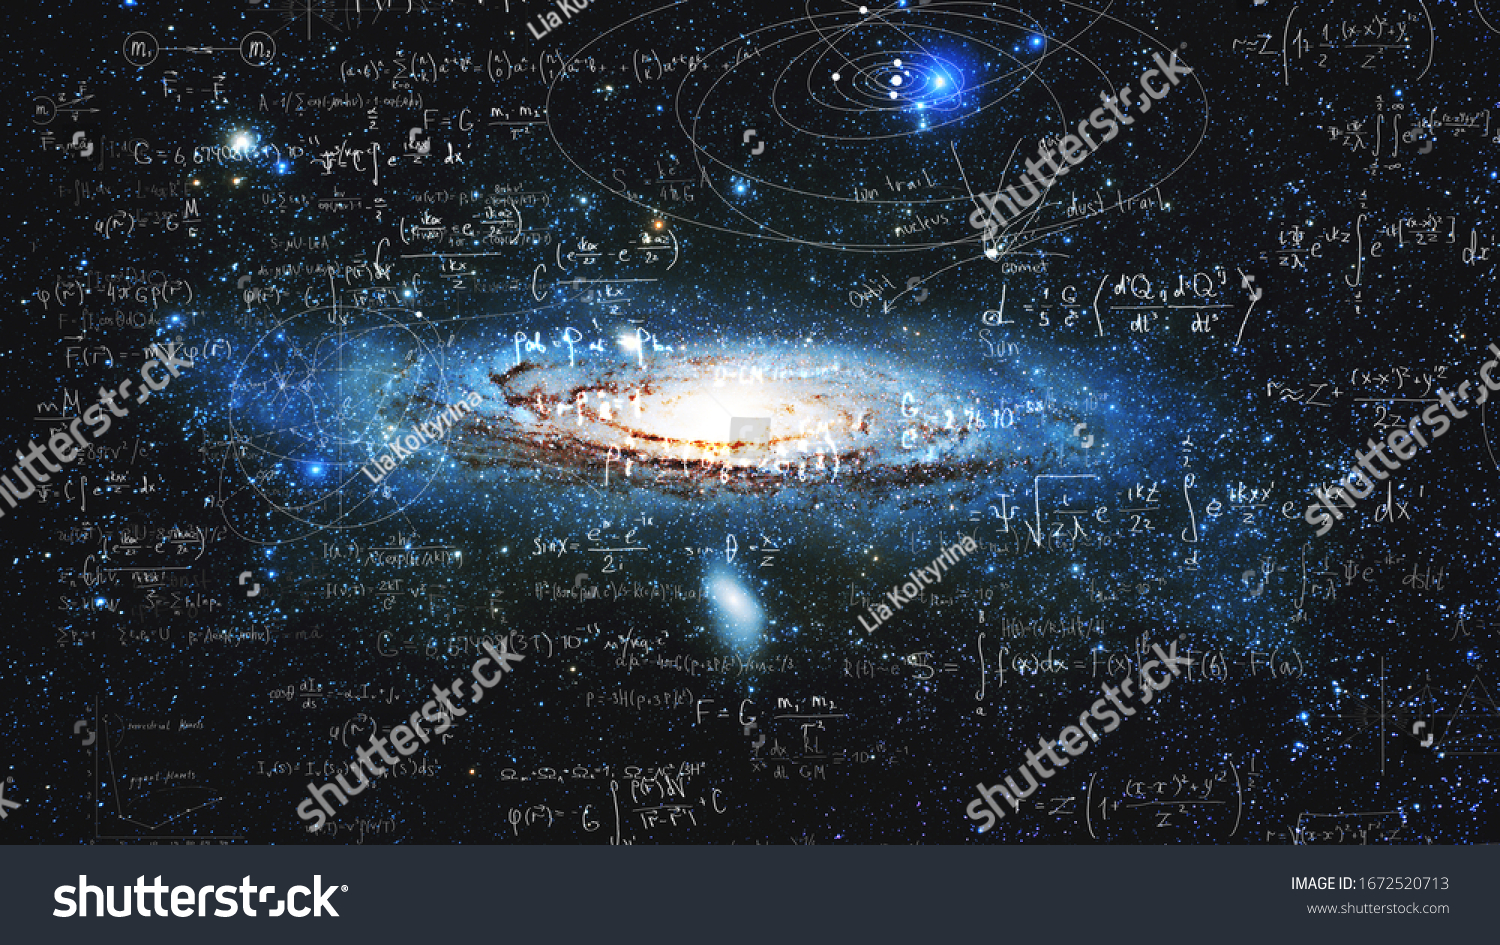 Science and research of the universe, spiral galaxy and physical formulas, concept of knowledge and education. Elements of this image furnished by NASA. #1672520713